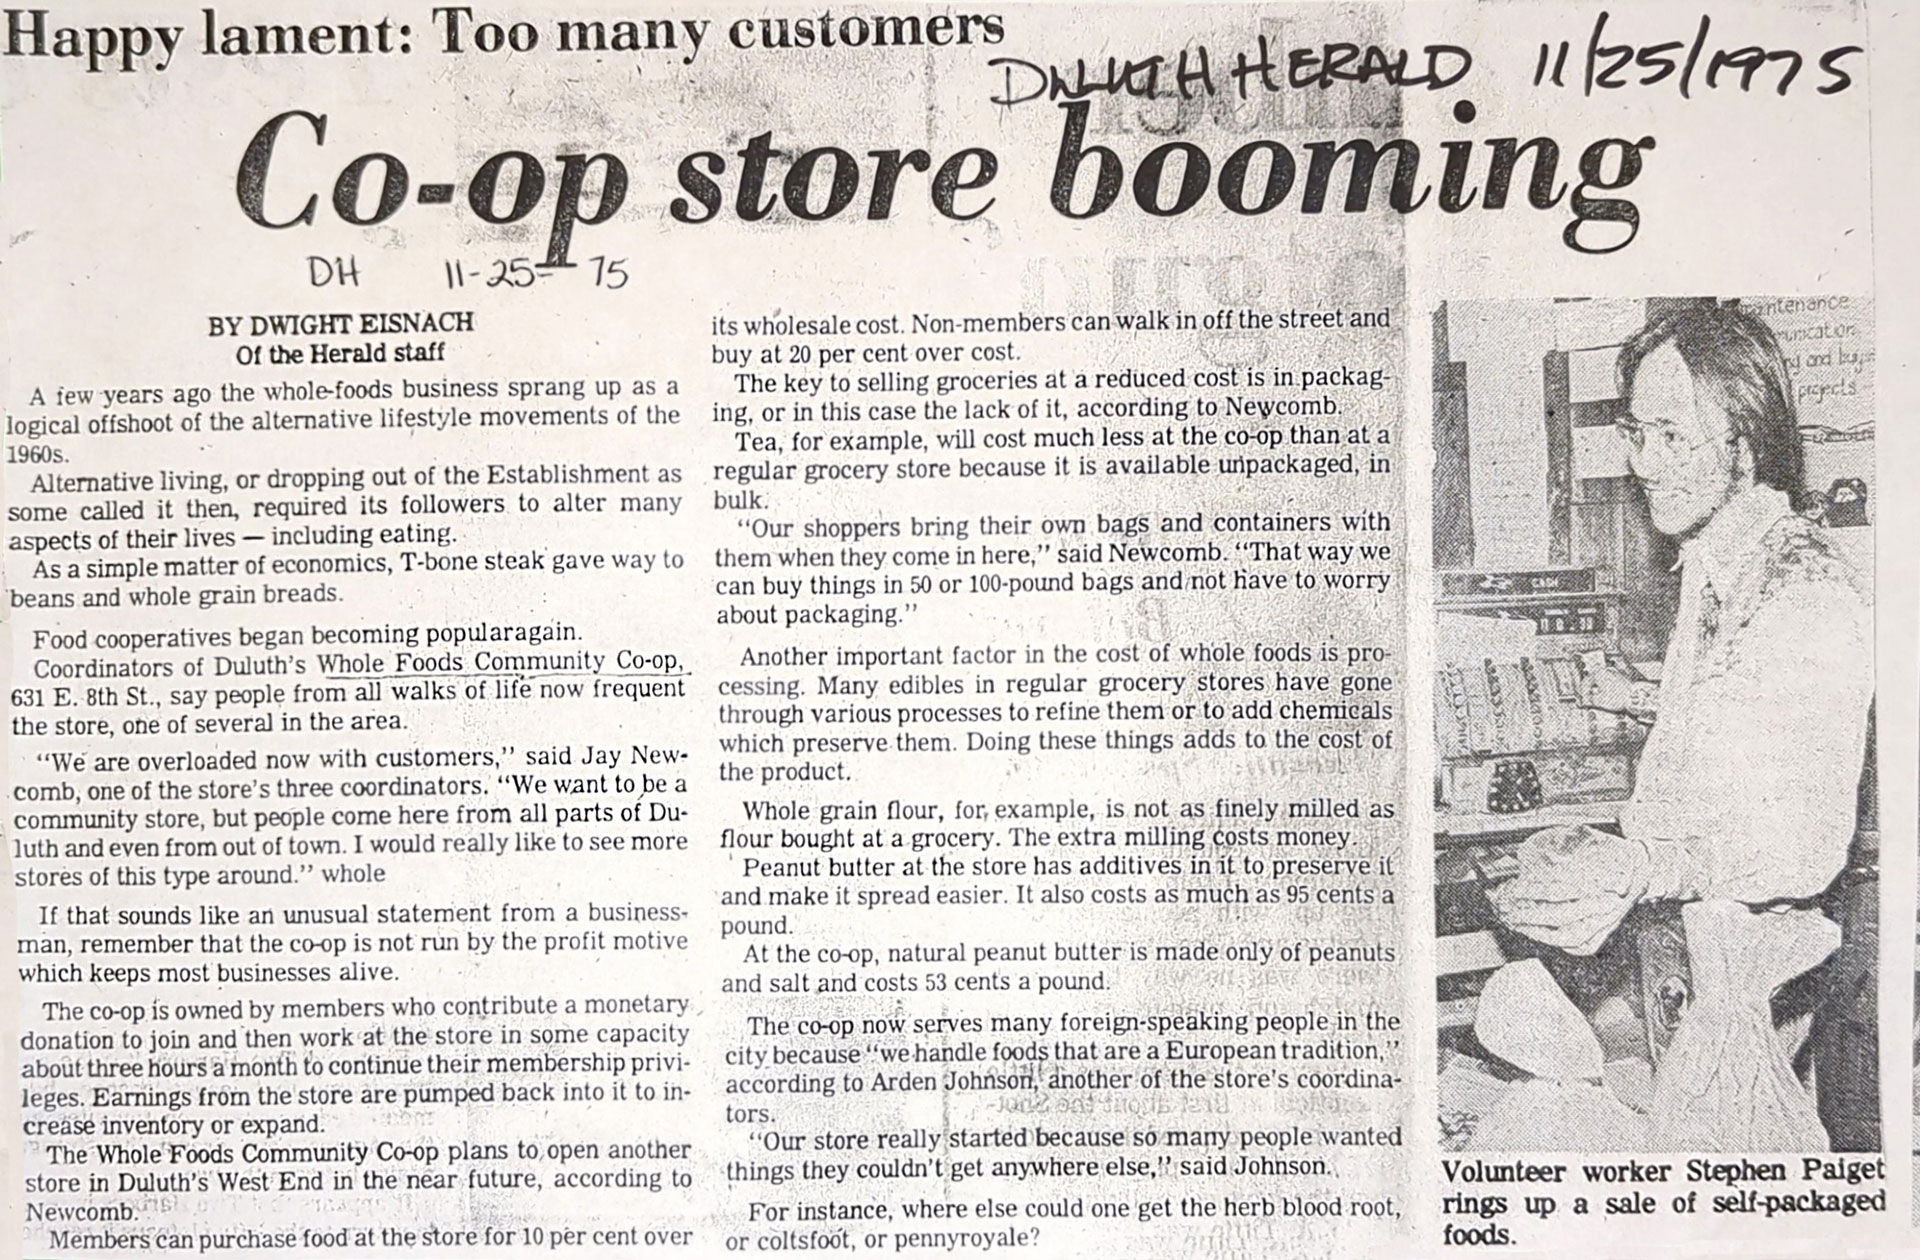 A newspaper clipping titled "Co-op store booming" with handwritten notes indicating the article is from the Duluth Herald, dated 11/25/75. The article discusses the success of Whole Foods Coop Duluth MN. On the right, a volunteer named Stephen Paiget is seen stocking shelves.